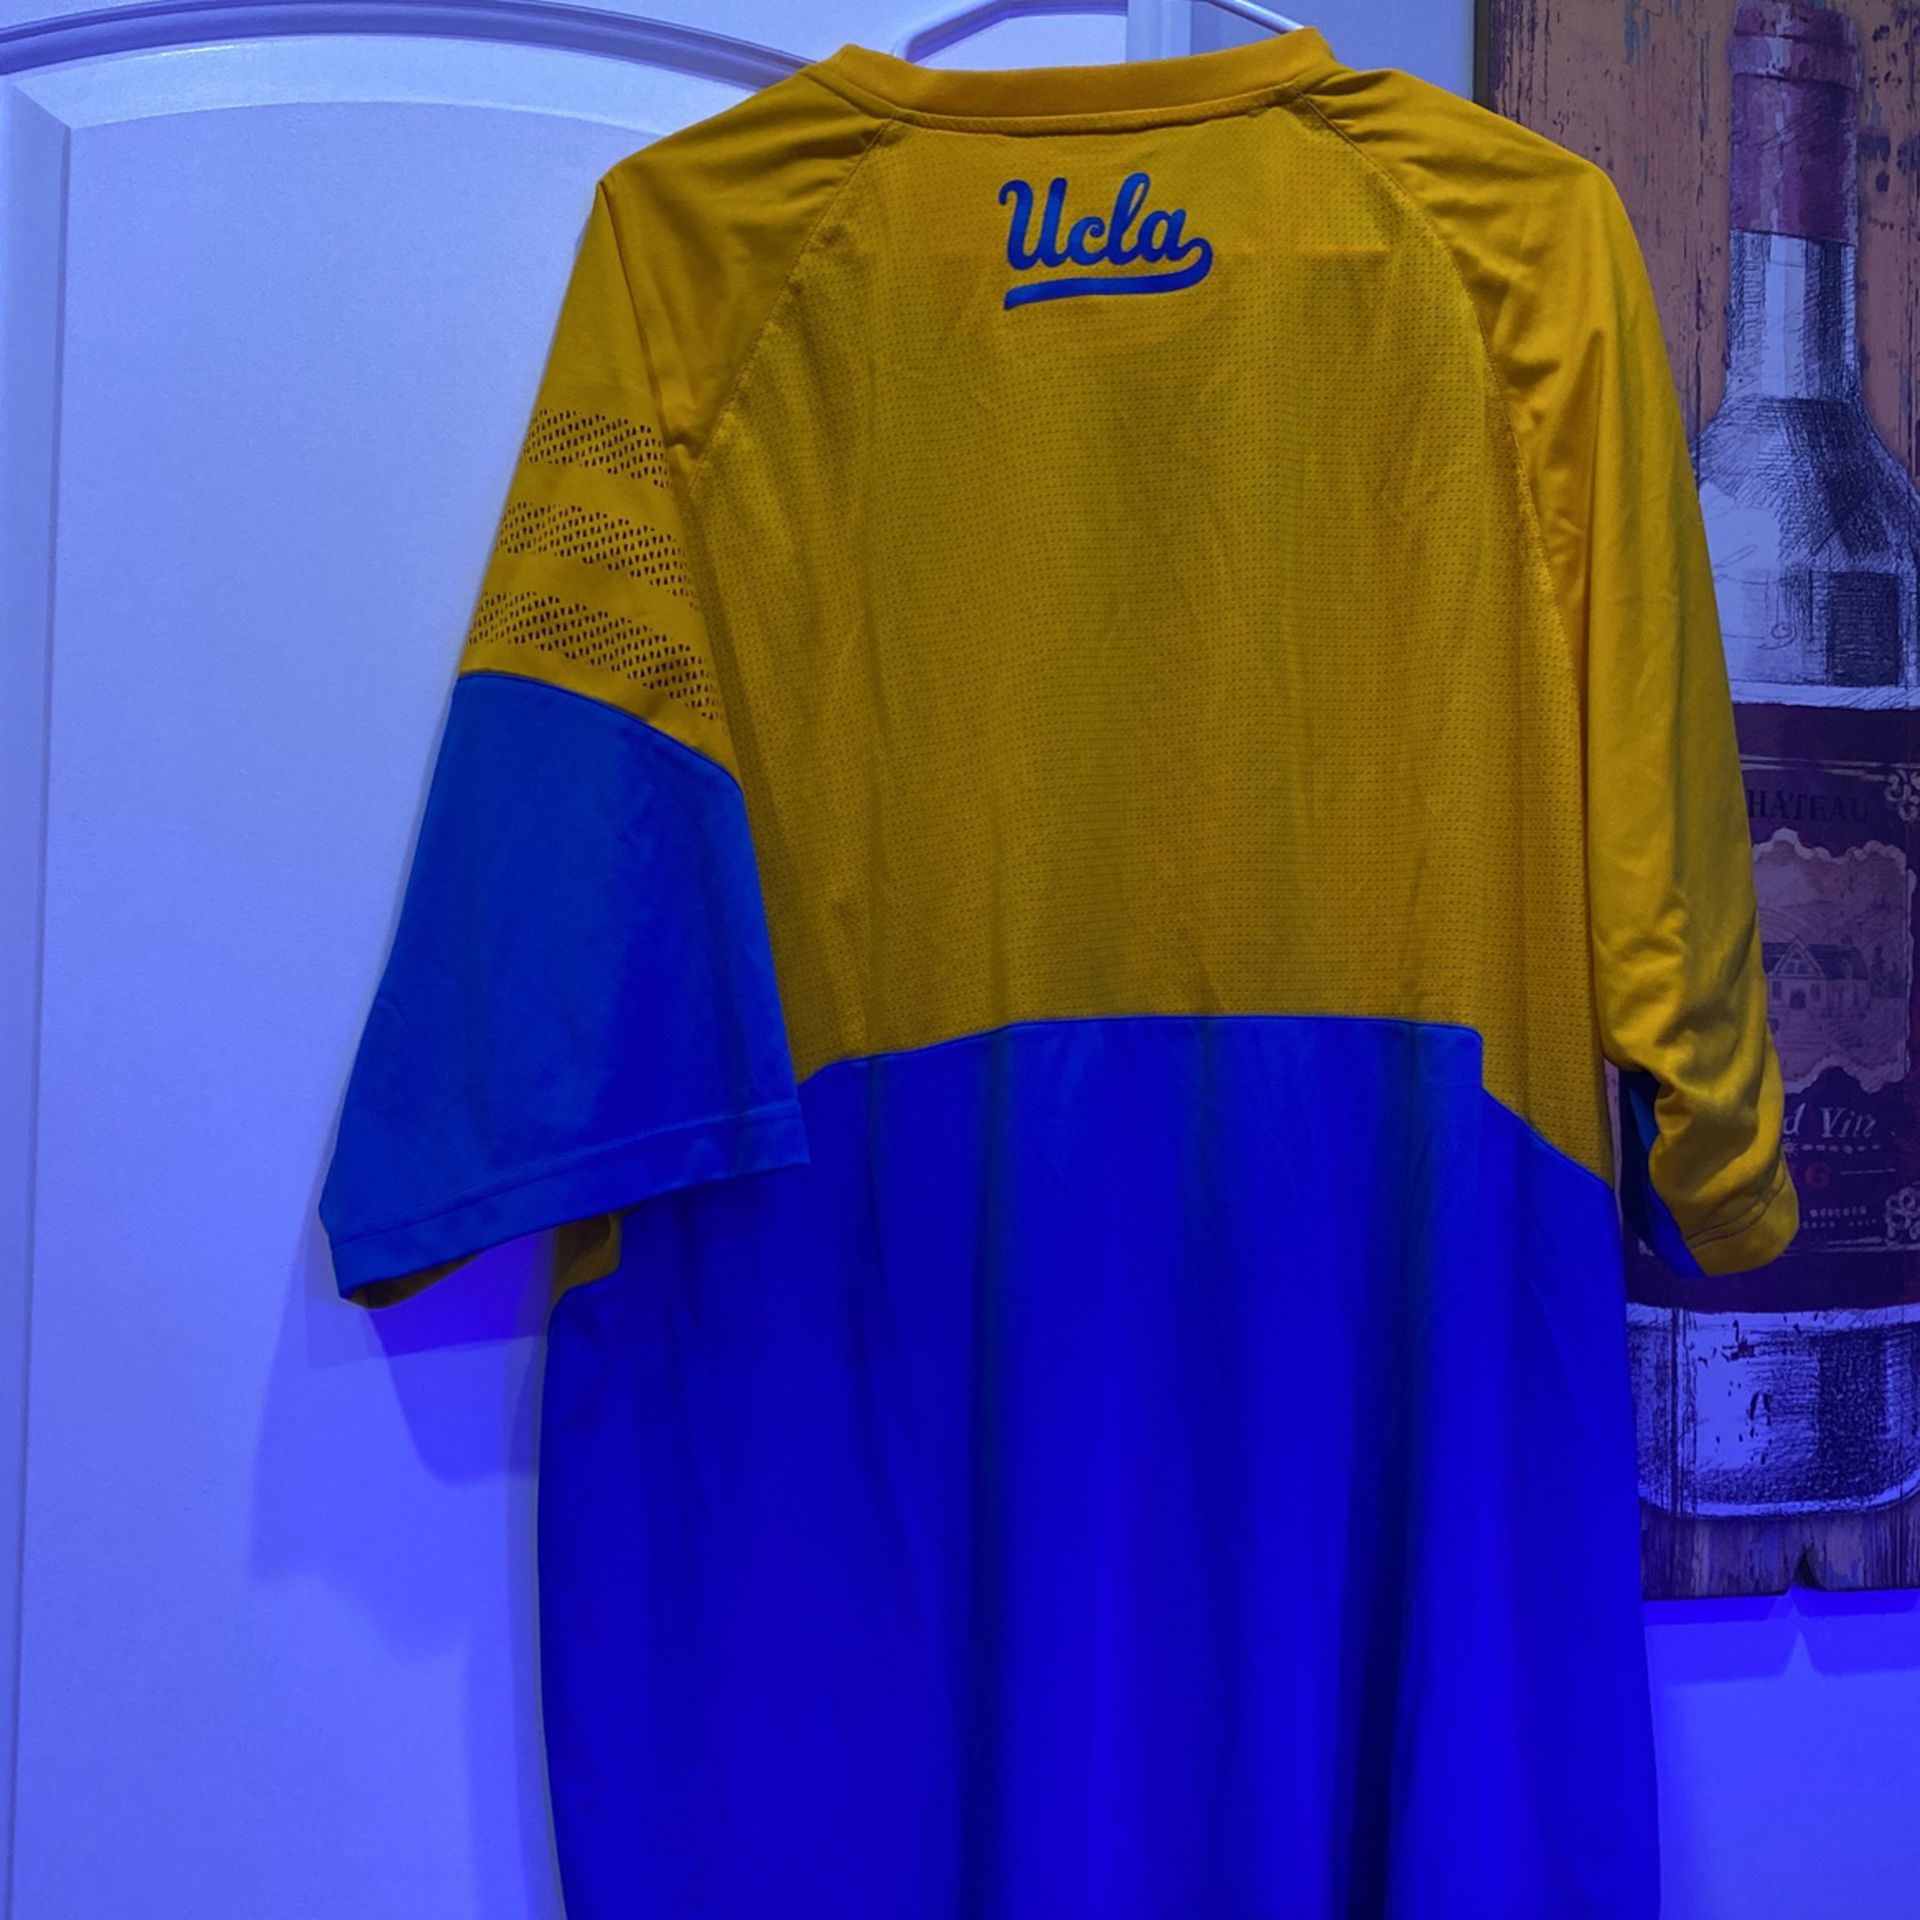 Adidas UCLA Baseball Jersey for Sale in Portland, OR - OfferUp